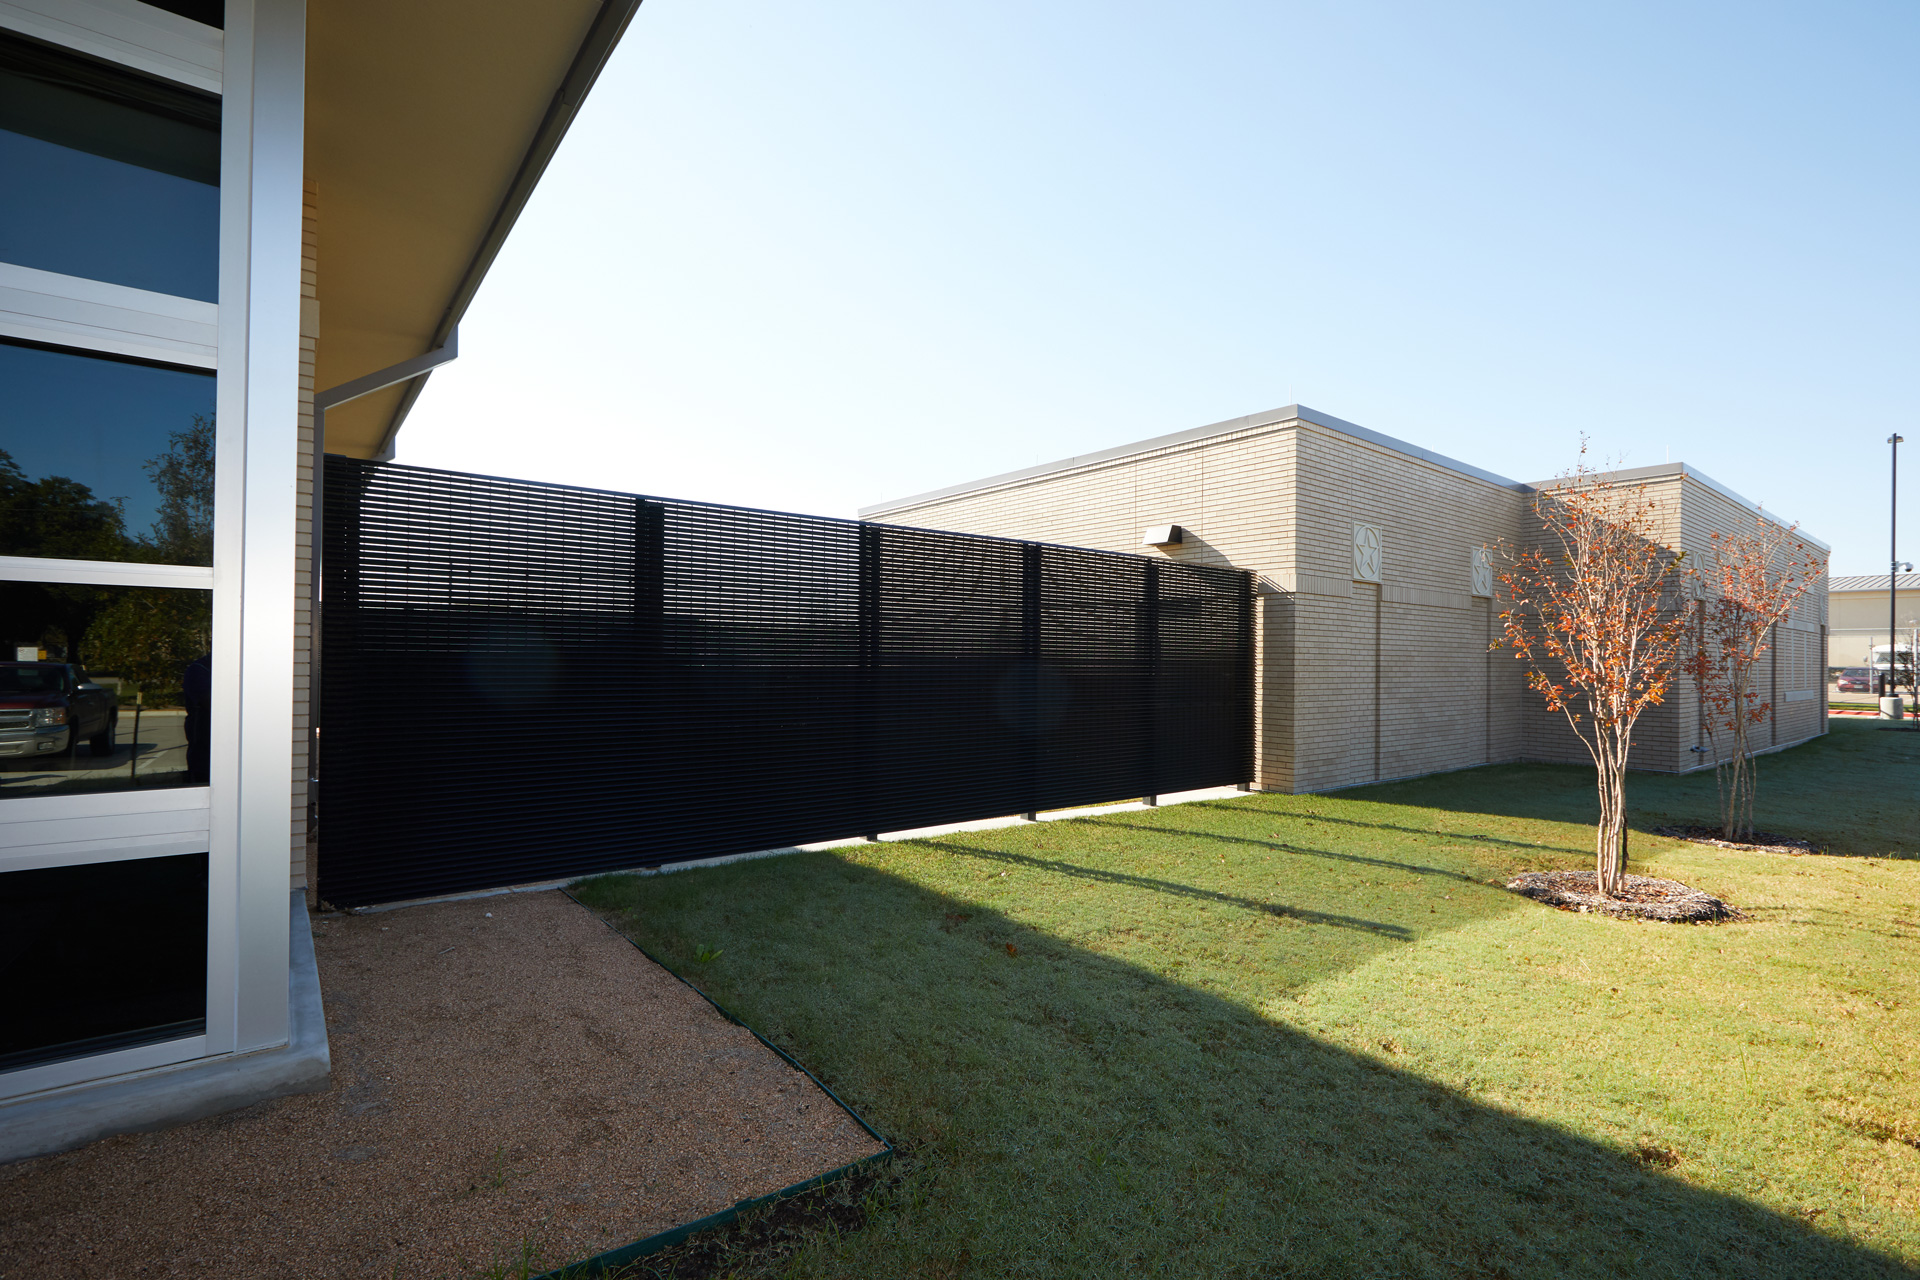 Black security fencing obscures the view of inner school grounds. 